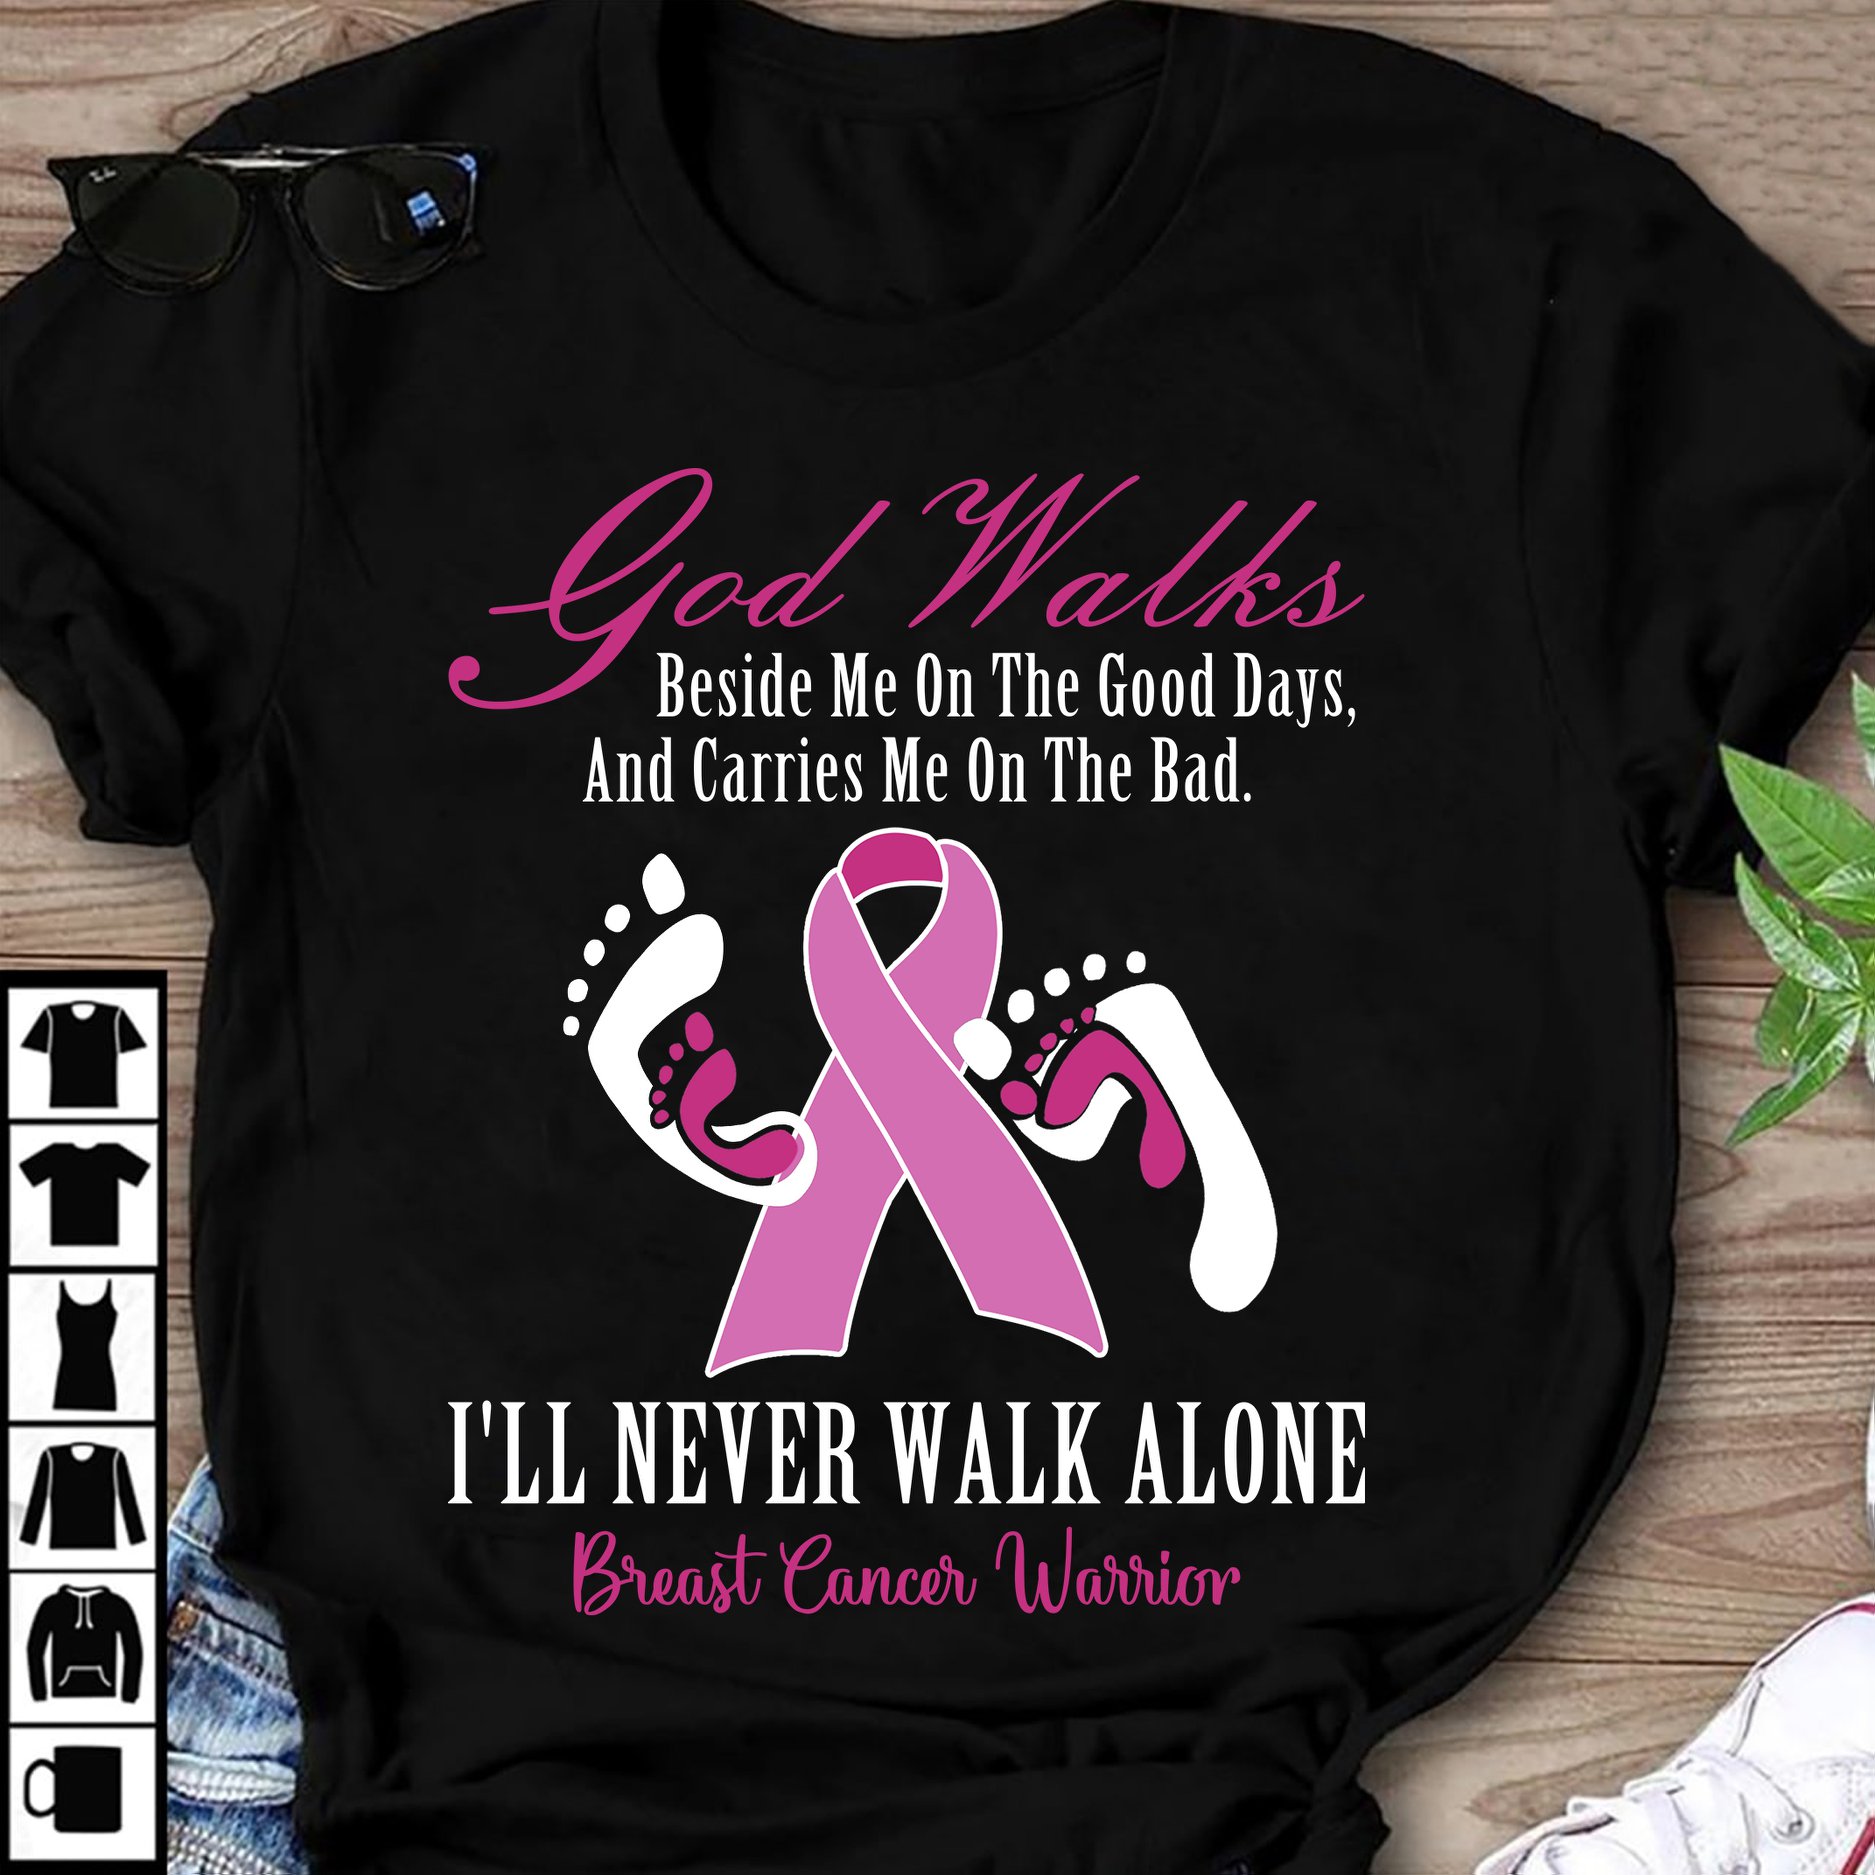 God walks beside me on the good days, and carries me on the bad - Breast cancer warrior